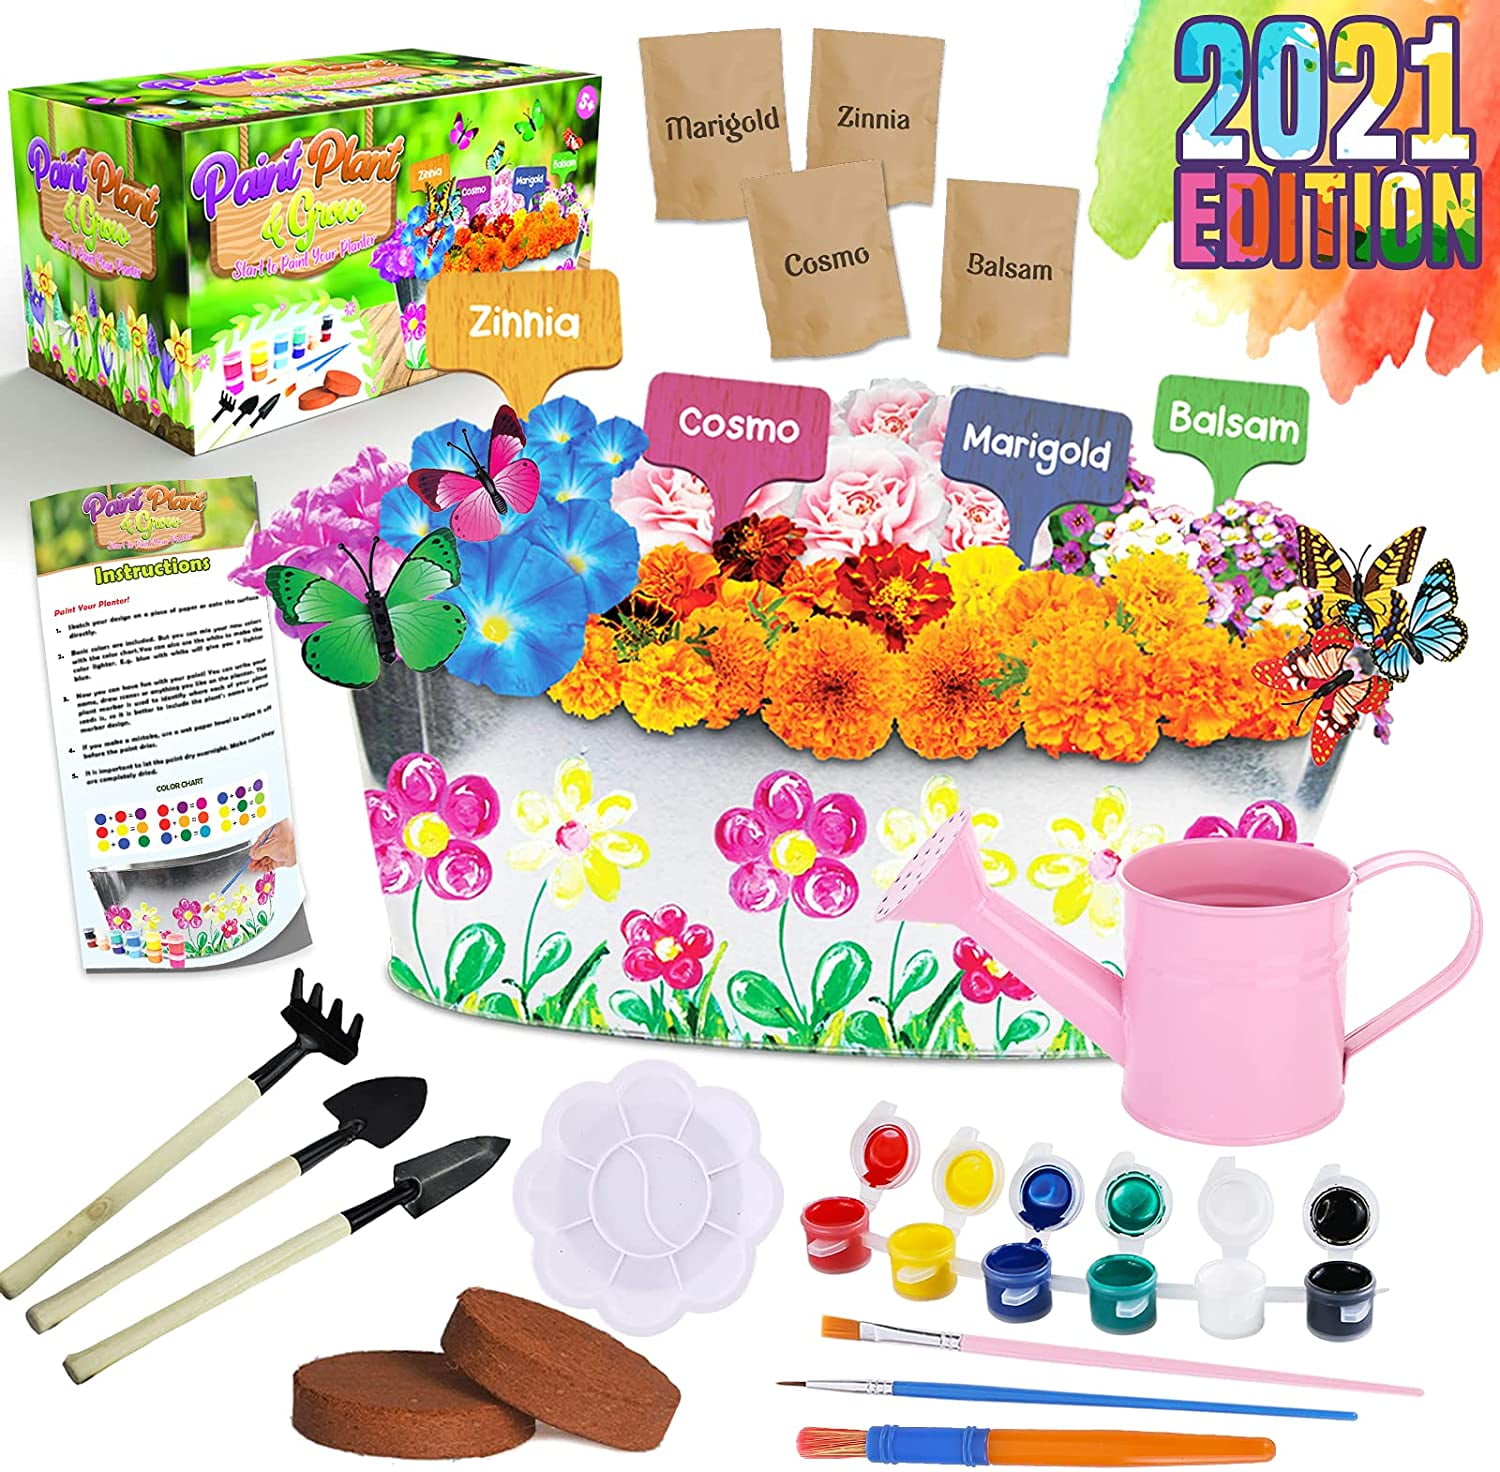 Growing Plants & Seeds Accessories Set Pots Indoor Garden Science STEM Toys Gift Crafts Birthday Arts Kits Ages 4 5 6 7 8-12 Year Old Boys Girls Climaxfy Flower Gardening Supplies for Kids